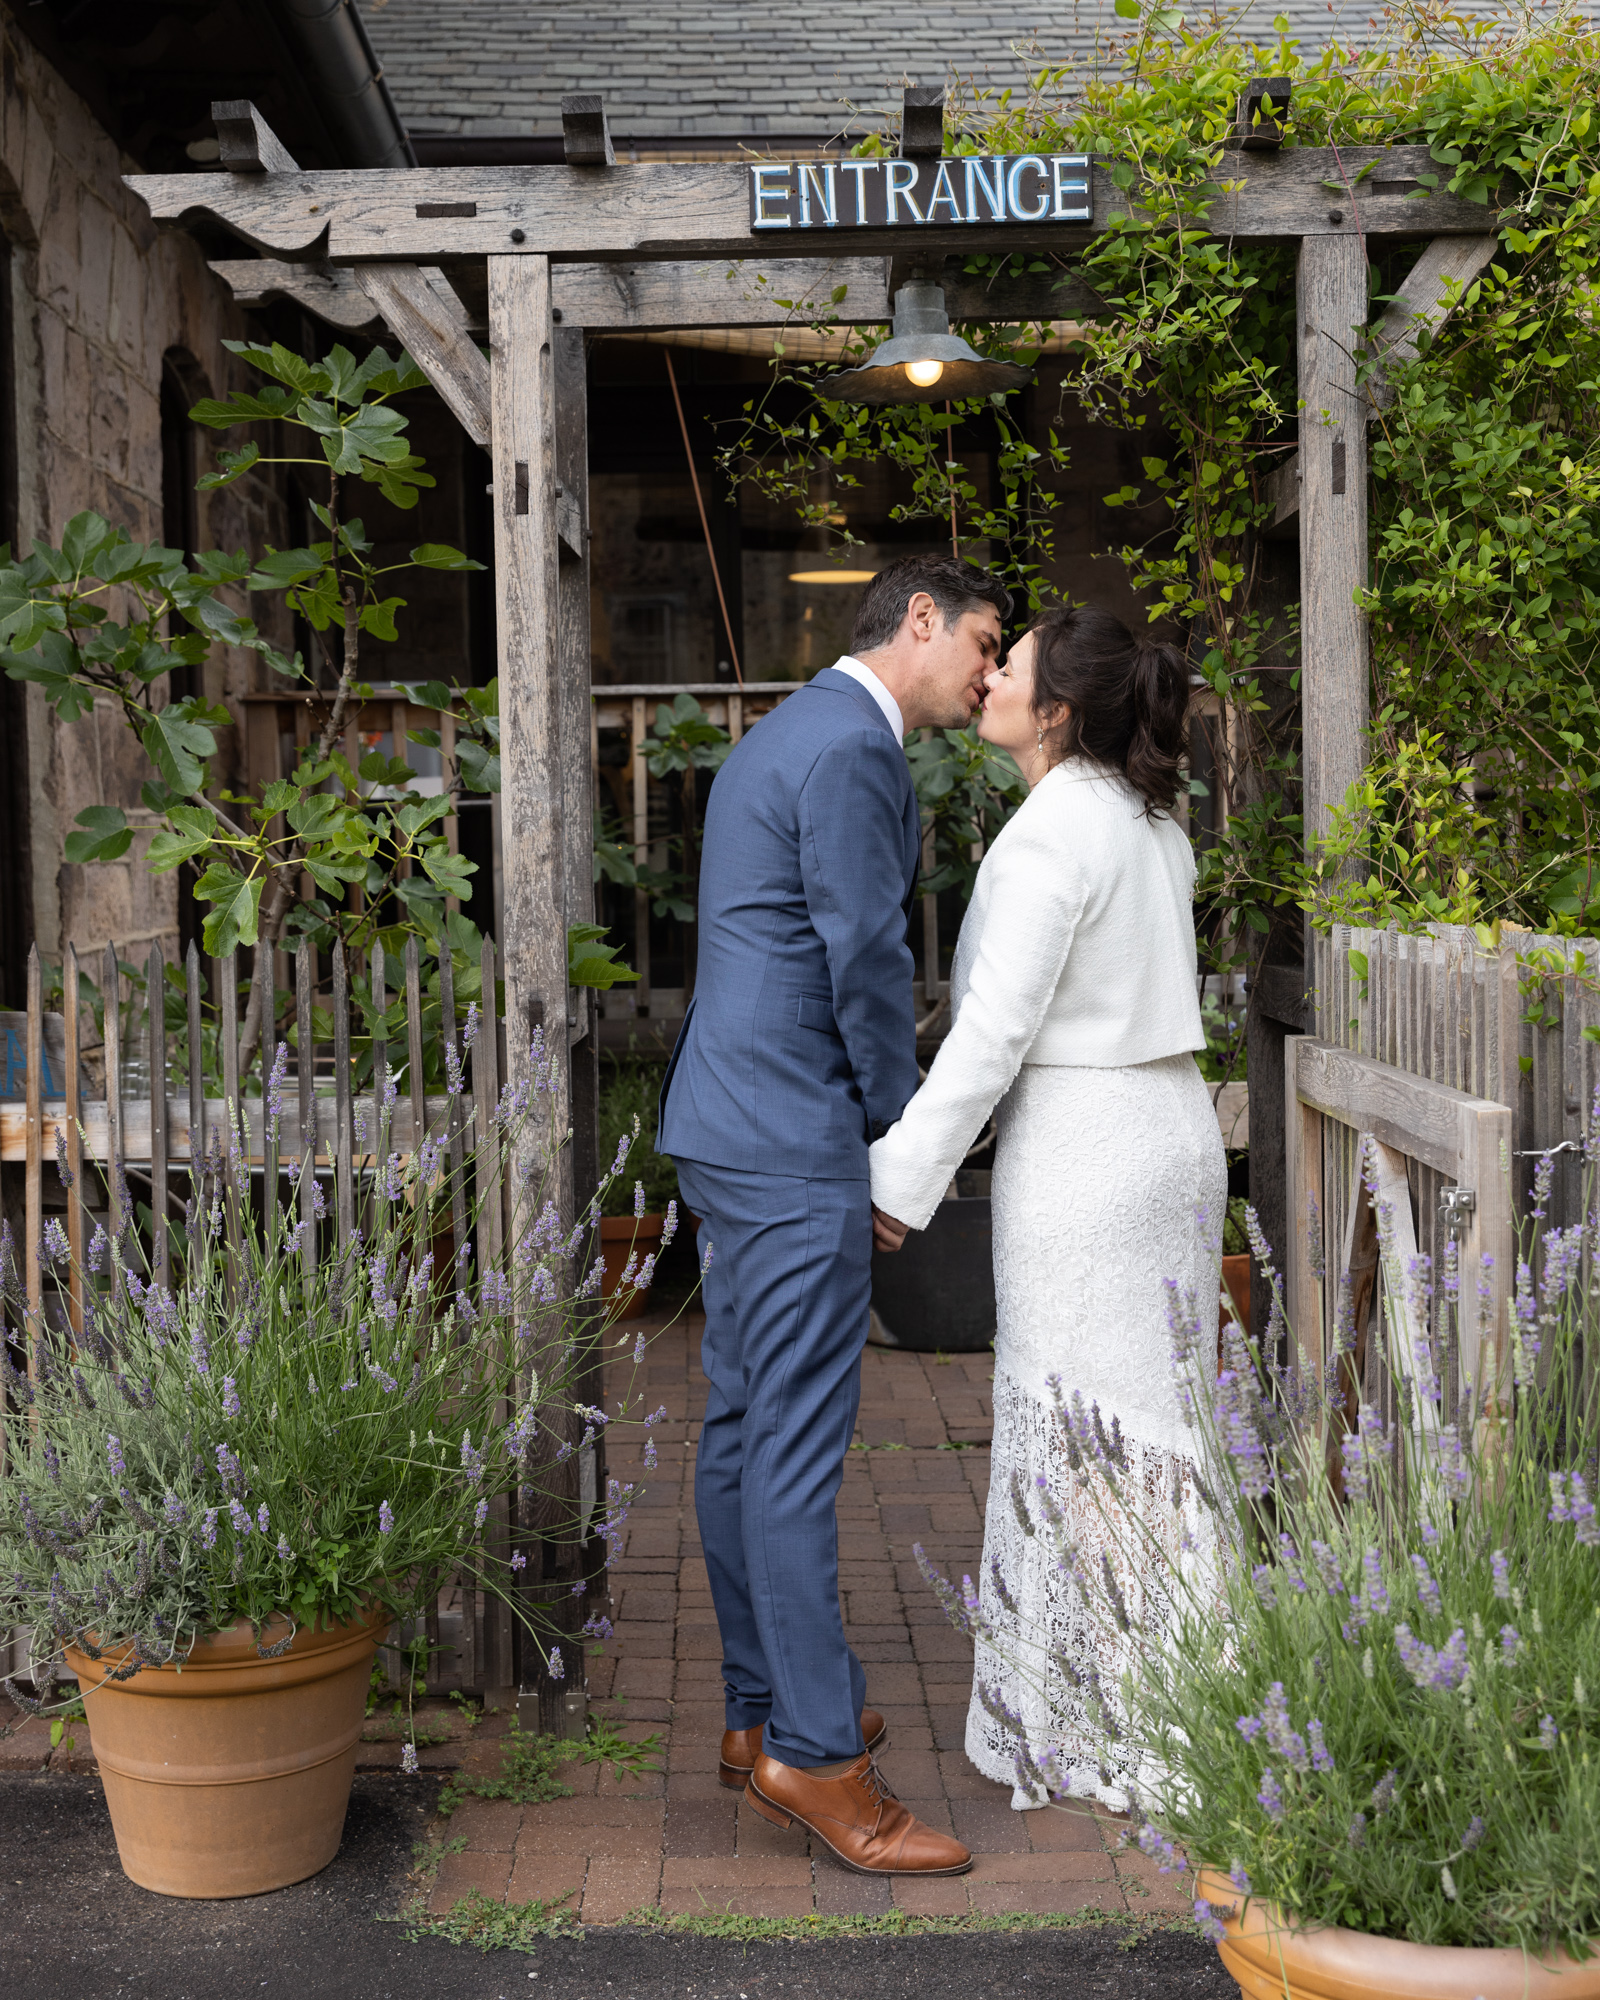 Stylish bride and groom kiss under the garden gate at Canal House Station in Milford NJ just before entering their wedding reception